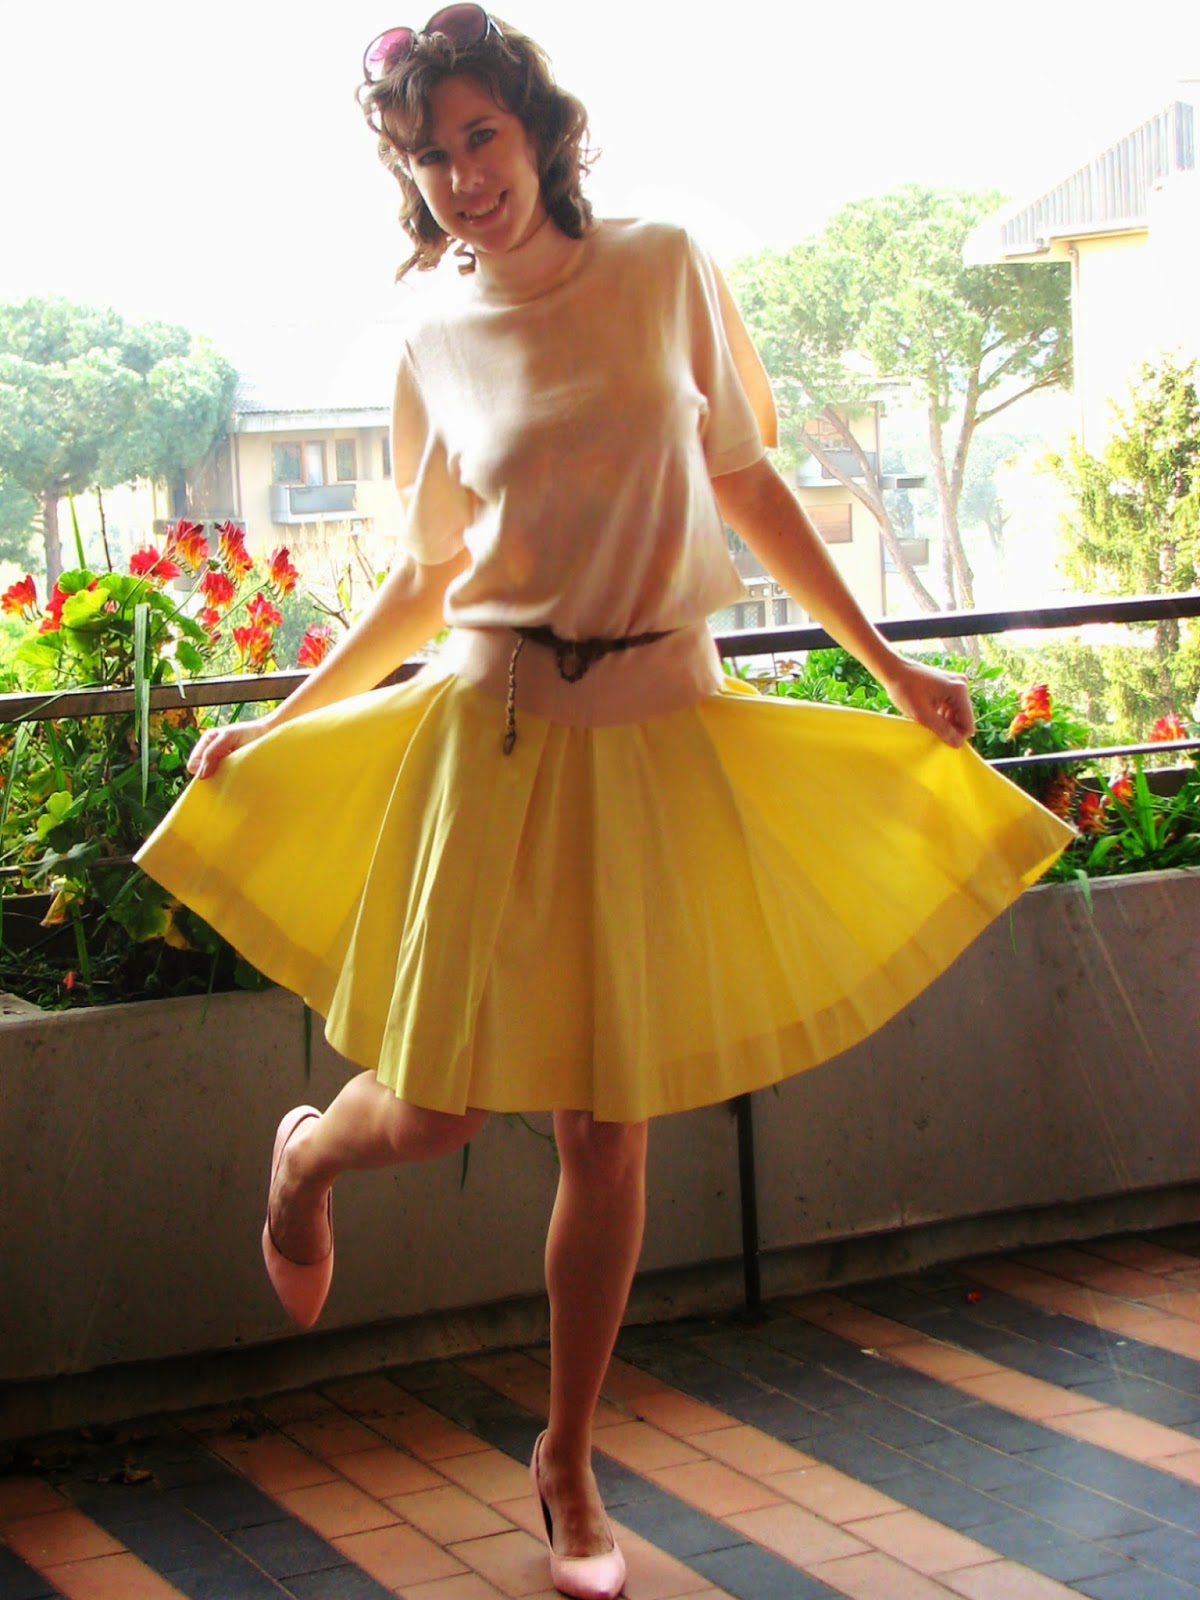 http://s-fashion-avenue.blogspot.it/2014/03/ladylike-with-full-skirt.html